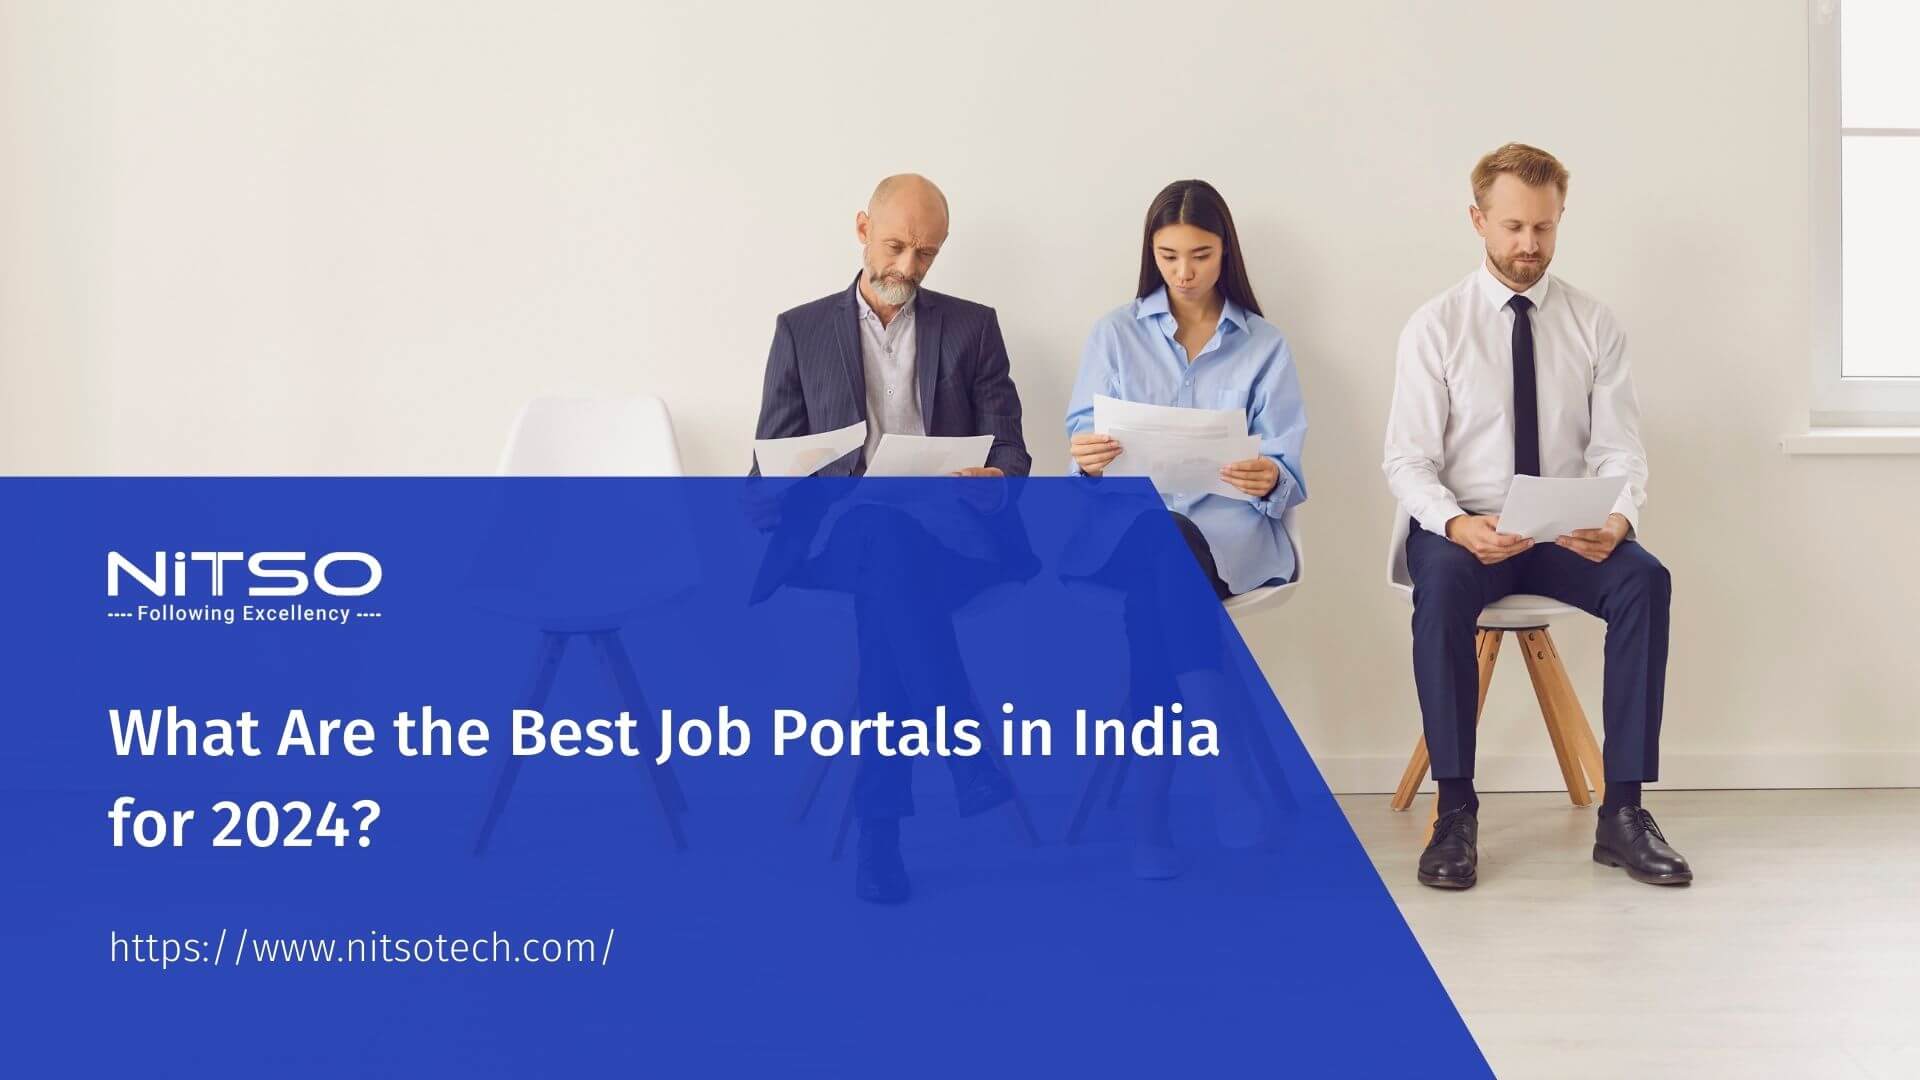 What Are the Best Job Portals in India for 2024?